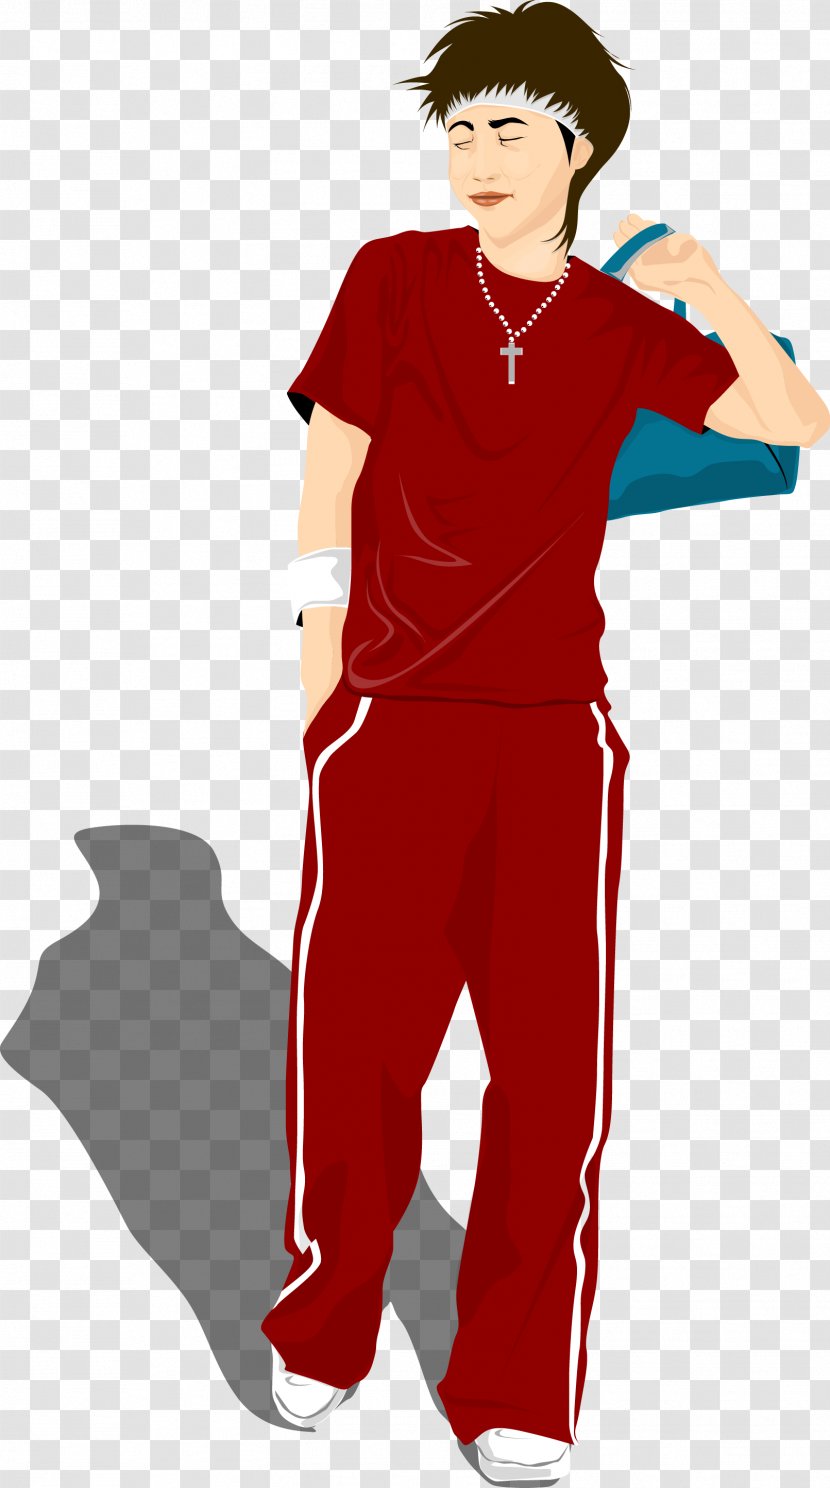 Fundal - Outerwear - Fitness People Transparent PNG